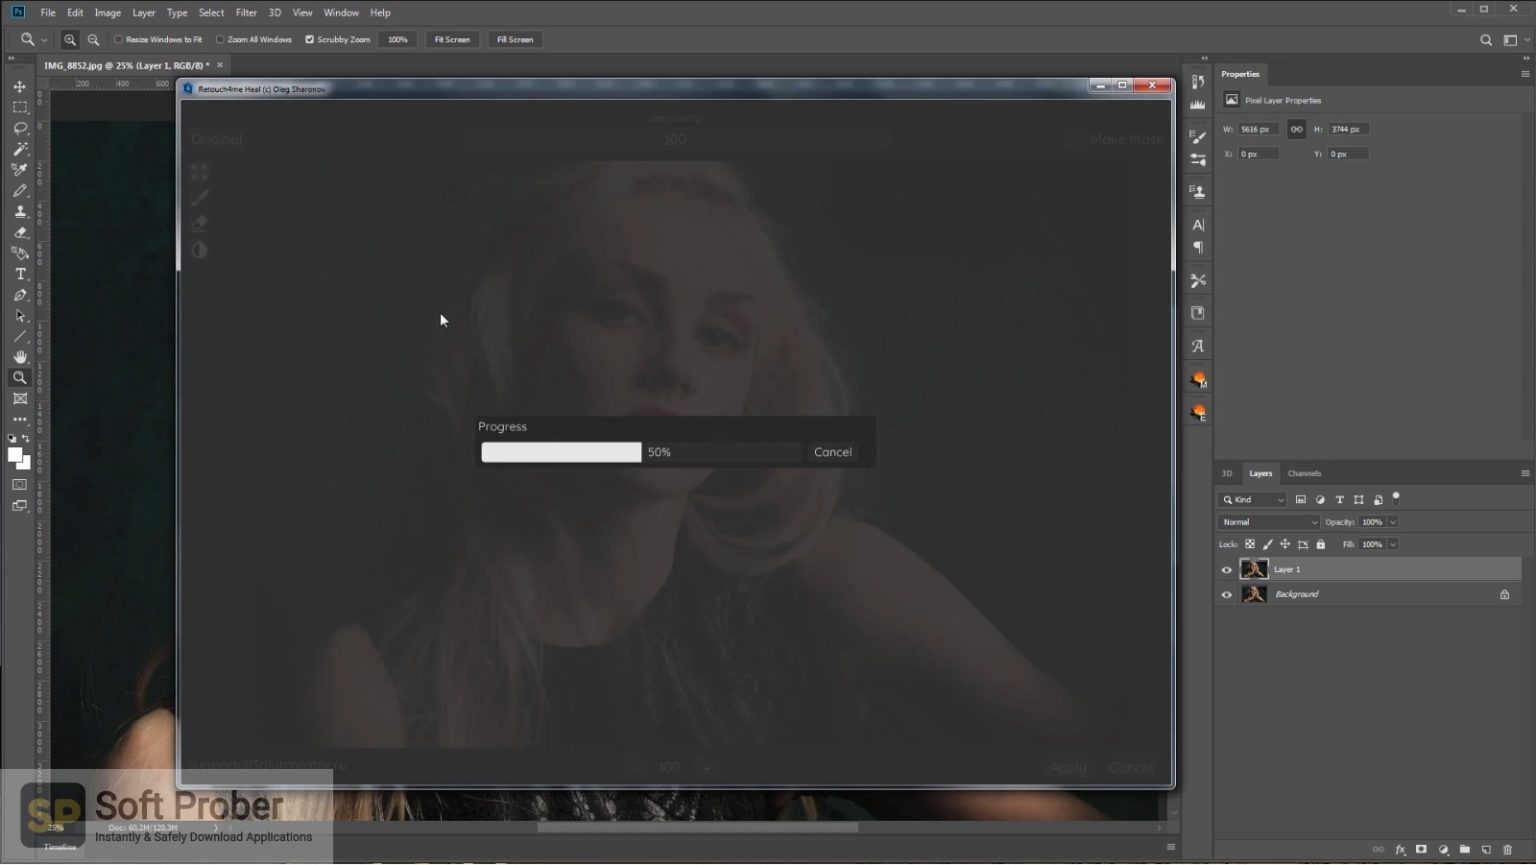 download the last version for windows Retouch4me Heal 1.018 / Dodge / Skin Tone